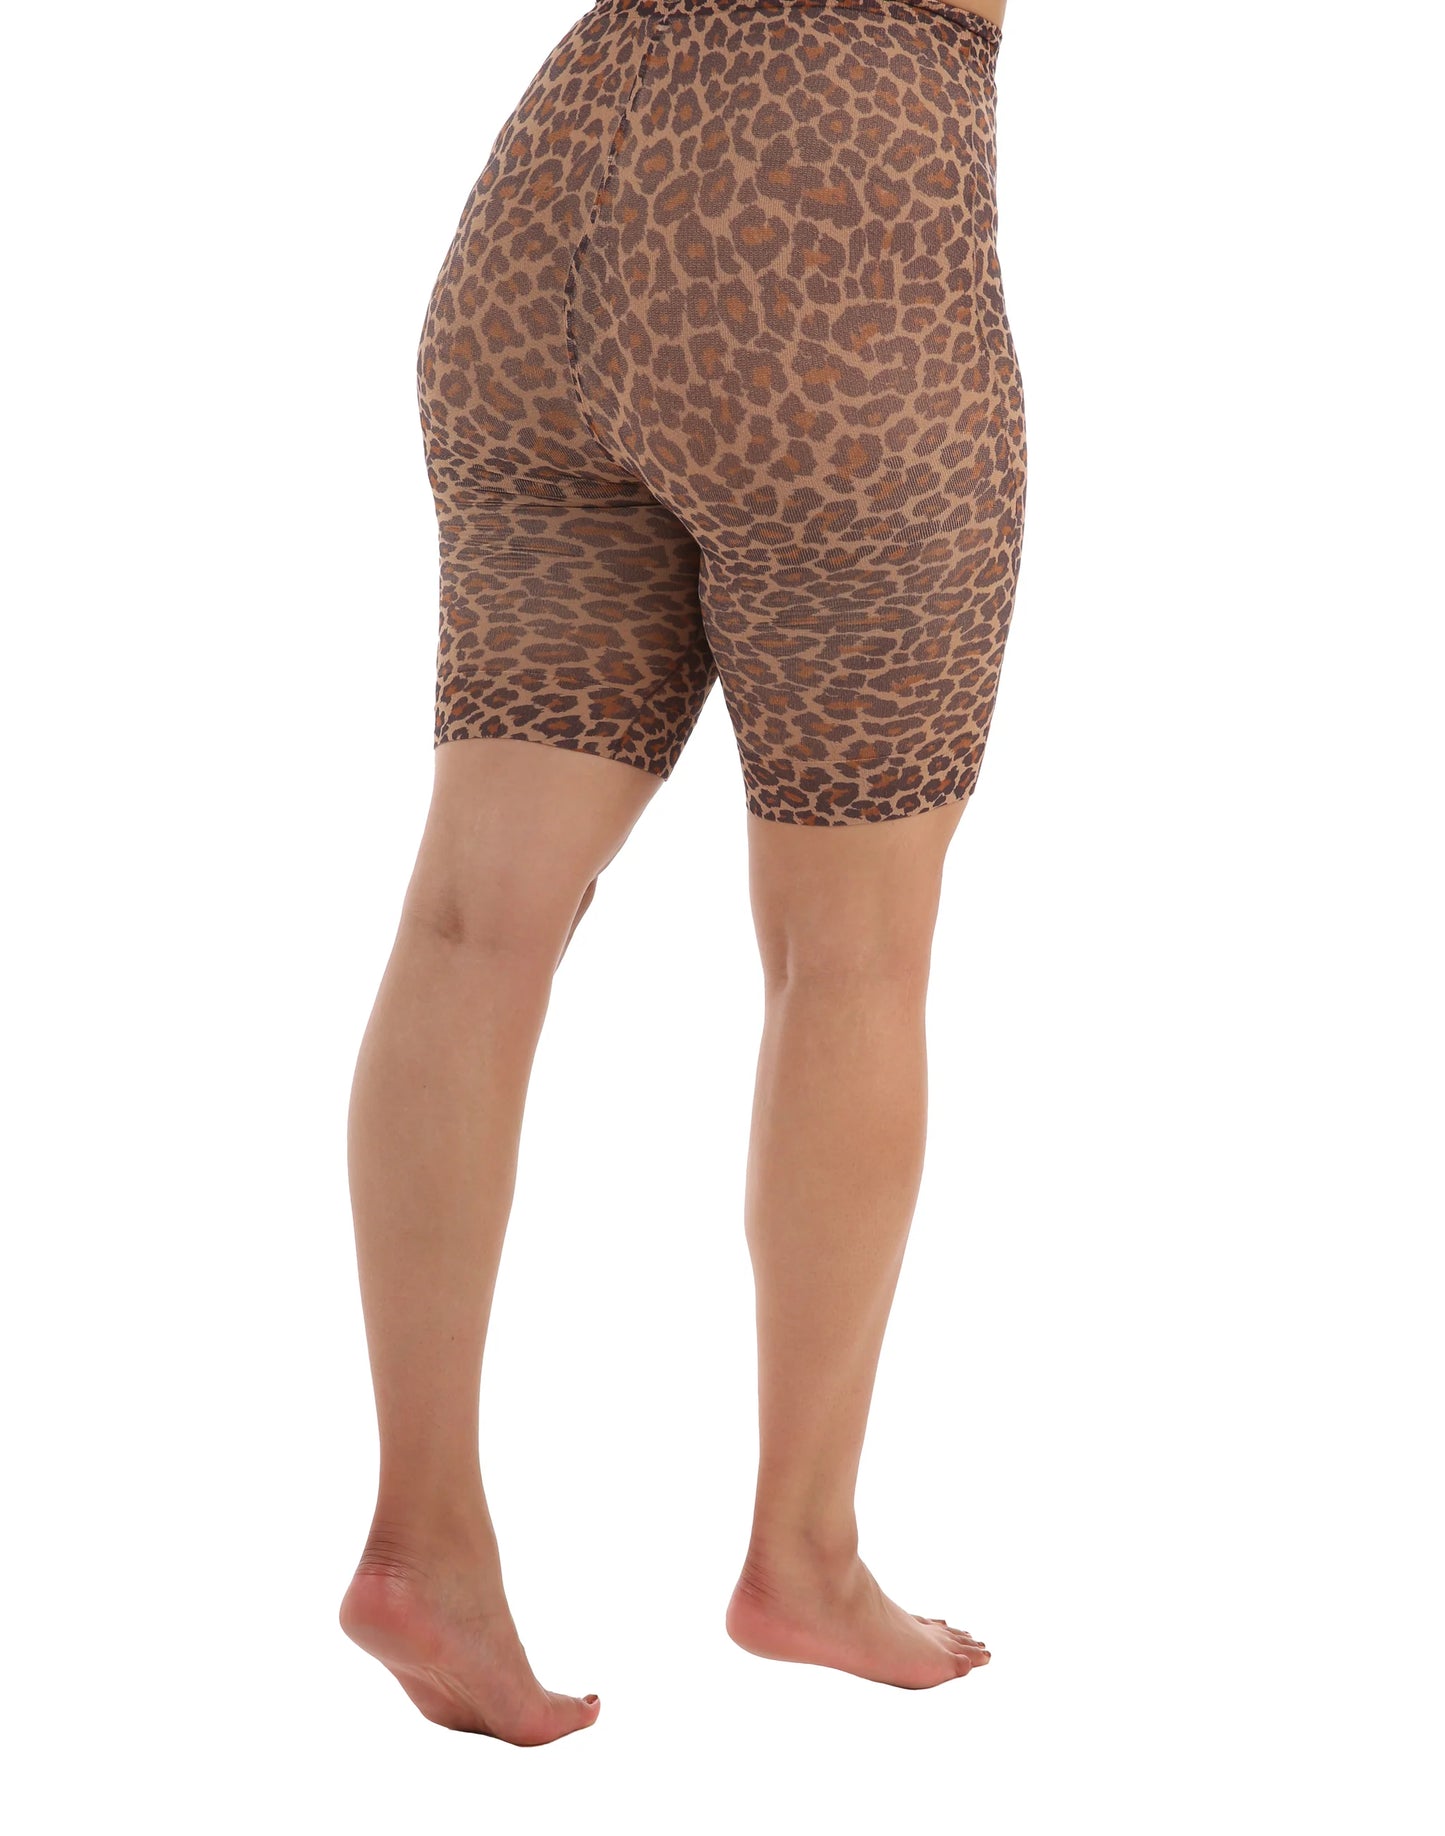 Pamela Mann Leopard Print Anti-Chafing Shorts - Nude opaque anti-chafing shorts with an all over leopard print pattern, great for preventing 'chub rub' during the hot Summer weather